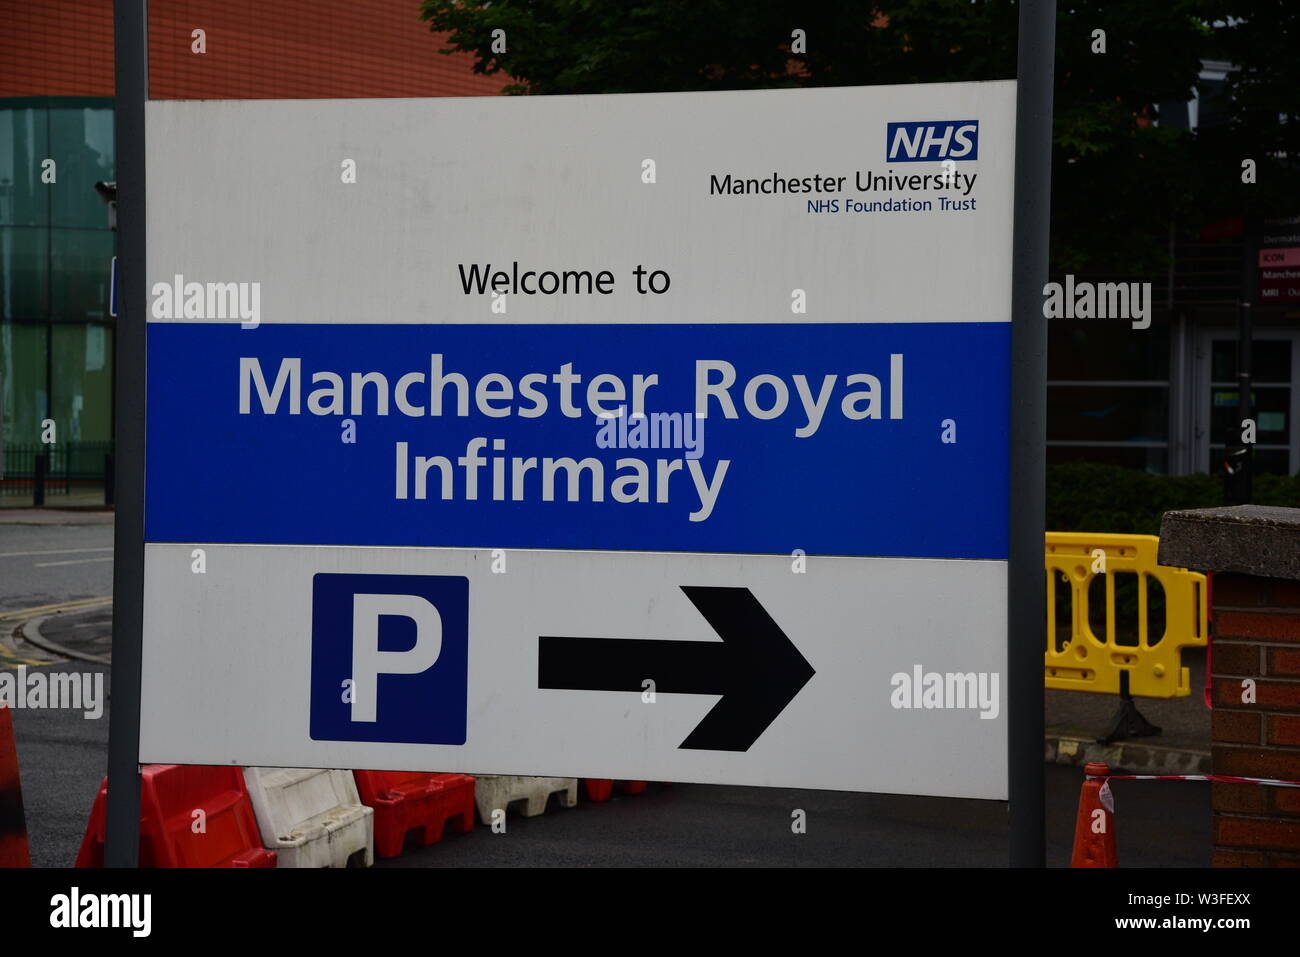 Manchester Royal Infirmary Banque D'Images